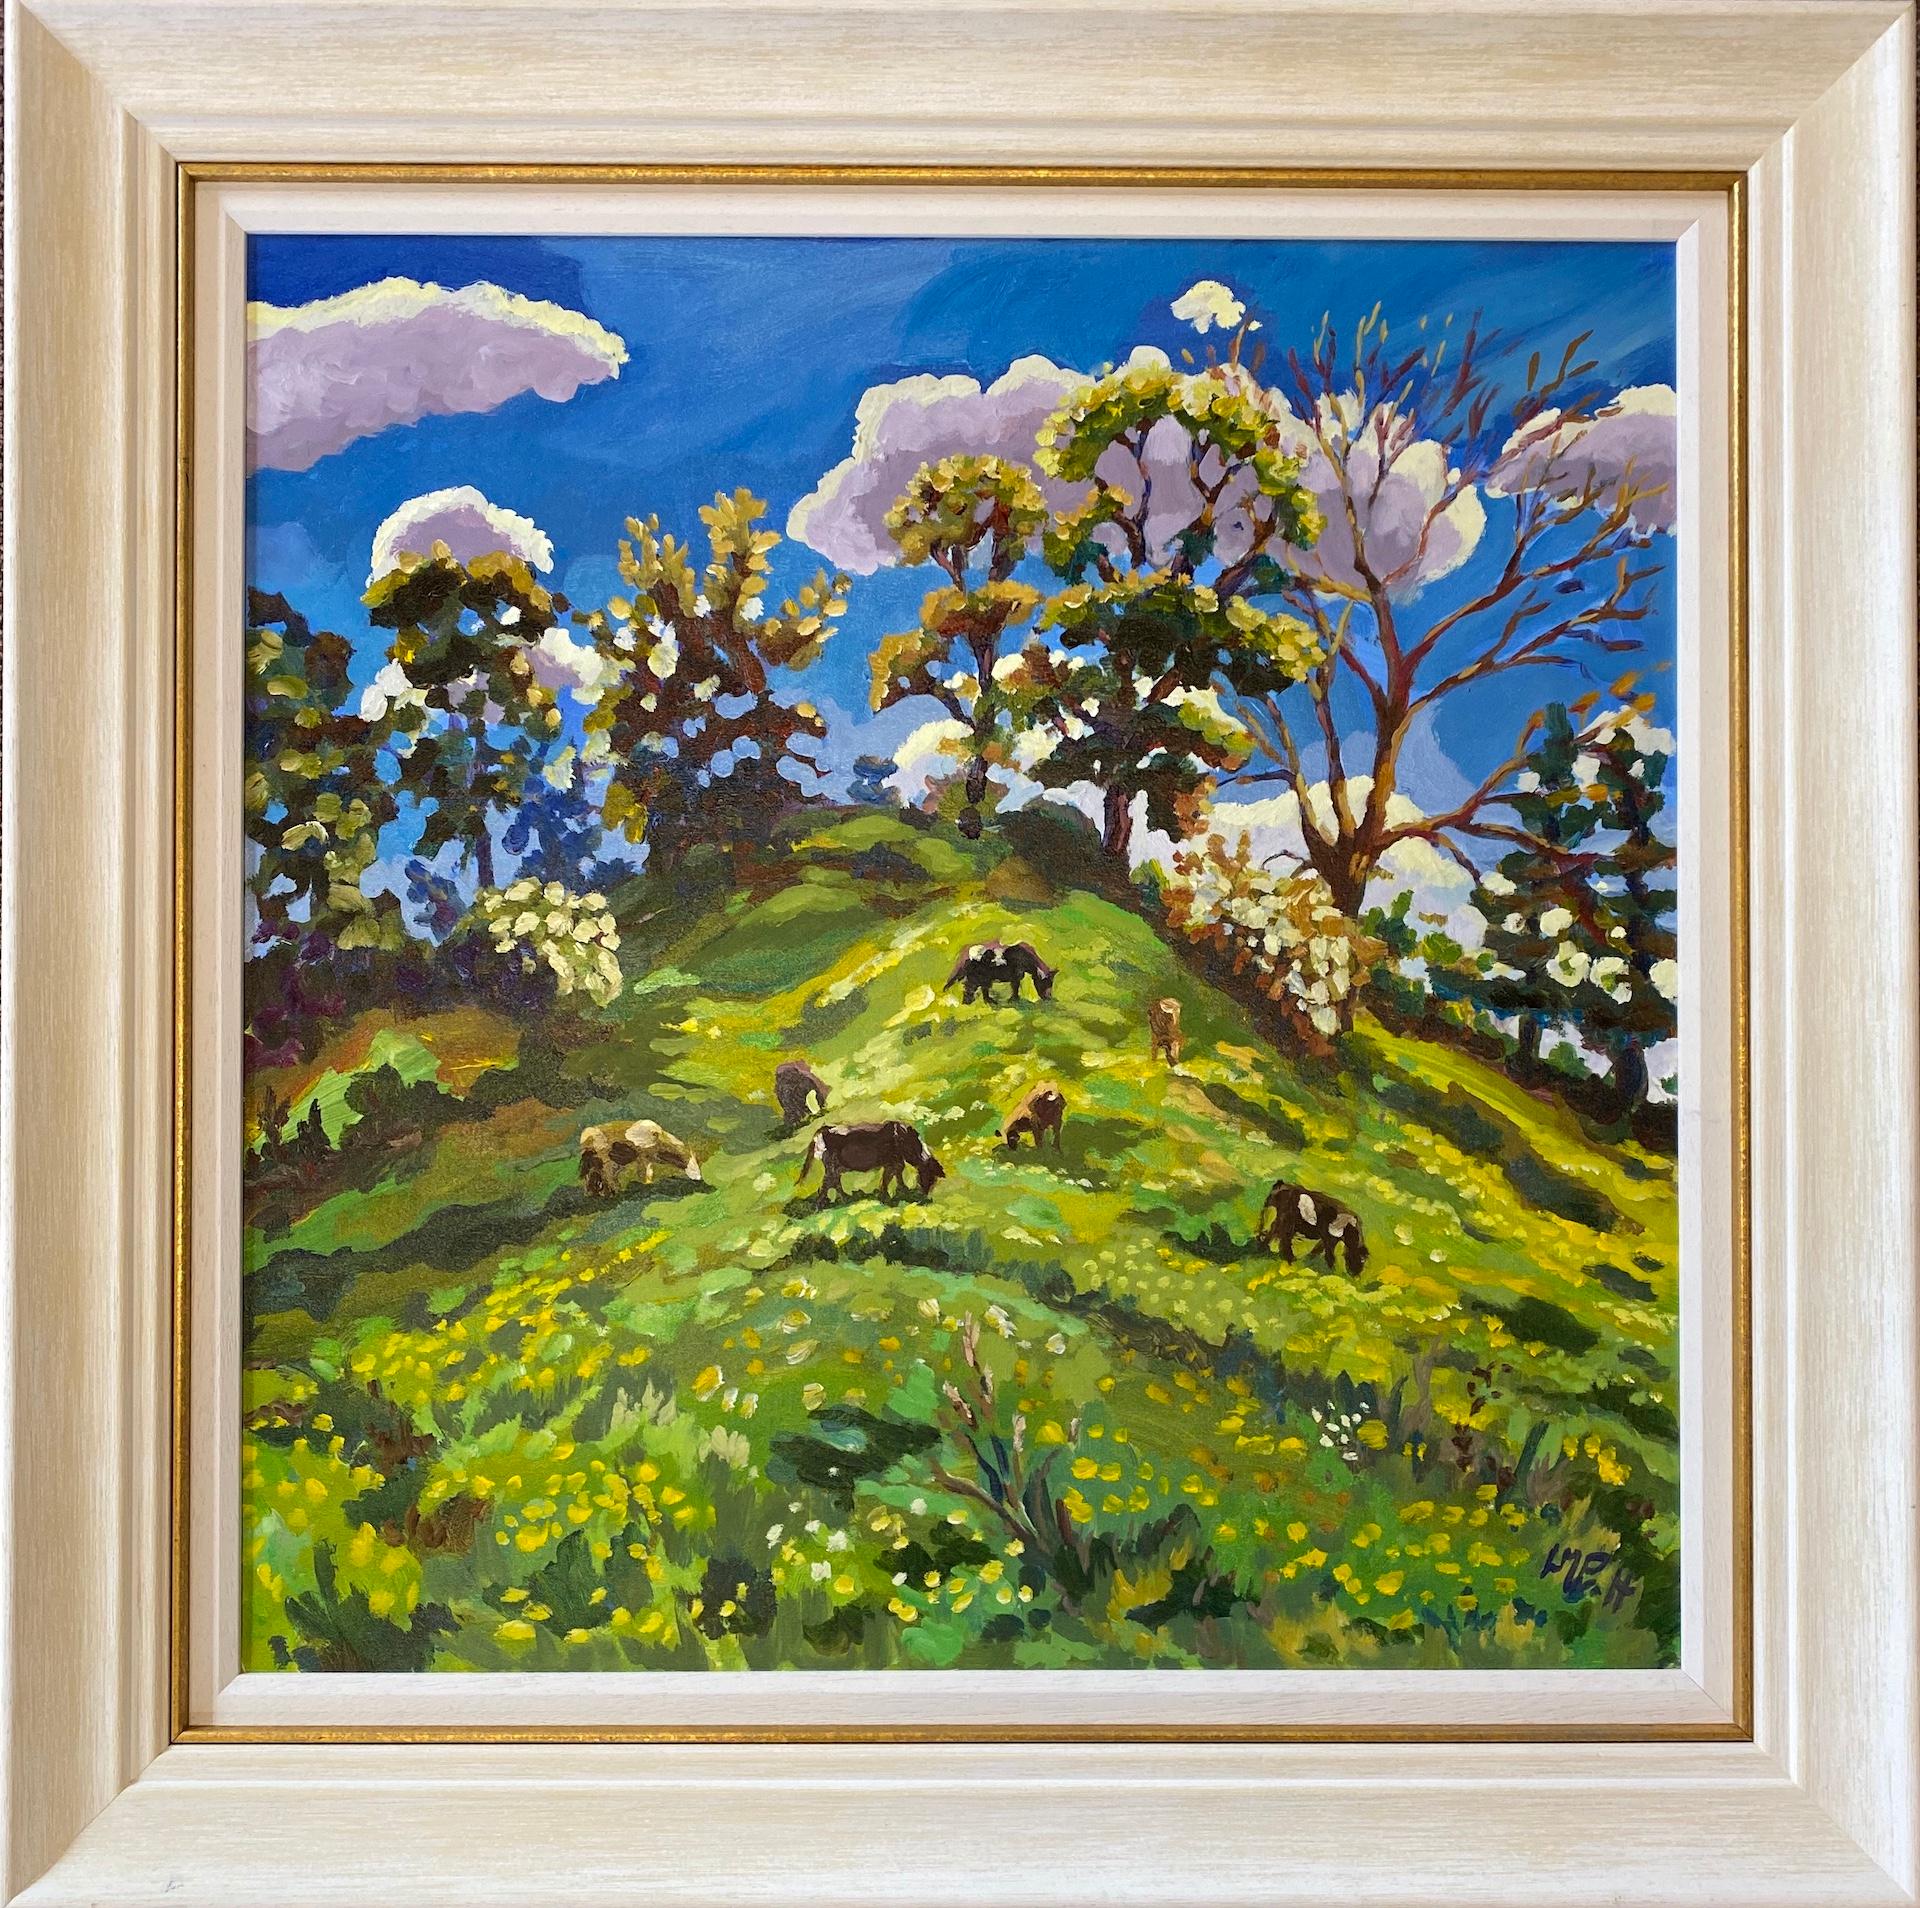 Grazers on the Motte and Bailey, Original painting, Impressionist, Landscape, UK - Contemporary Painting by Lucy Pratt